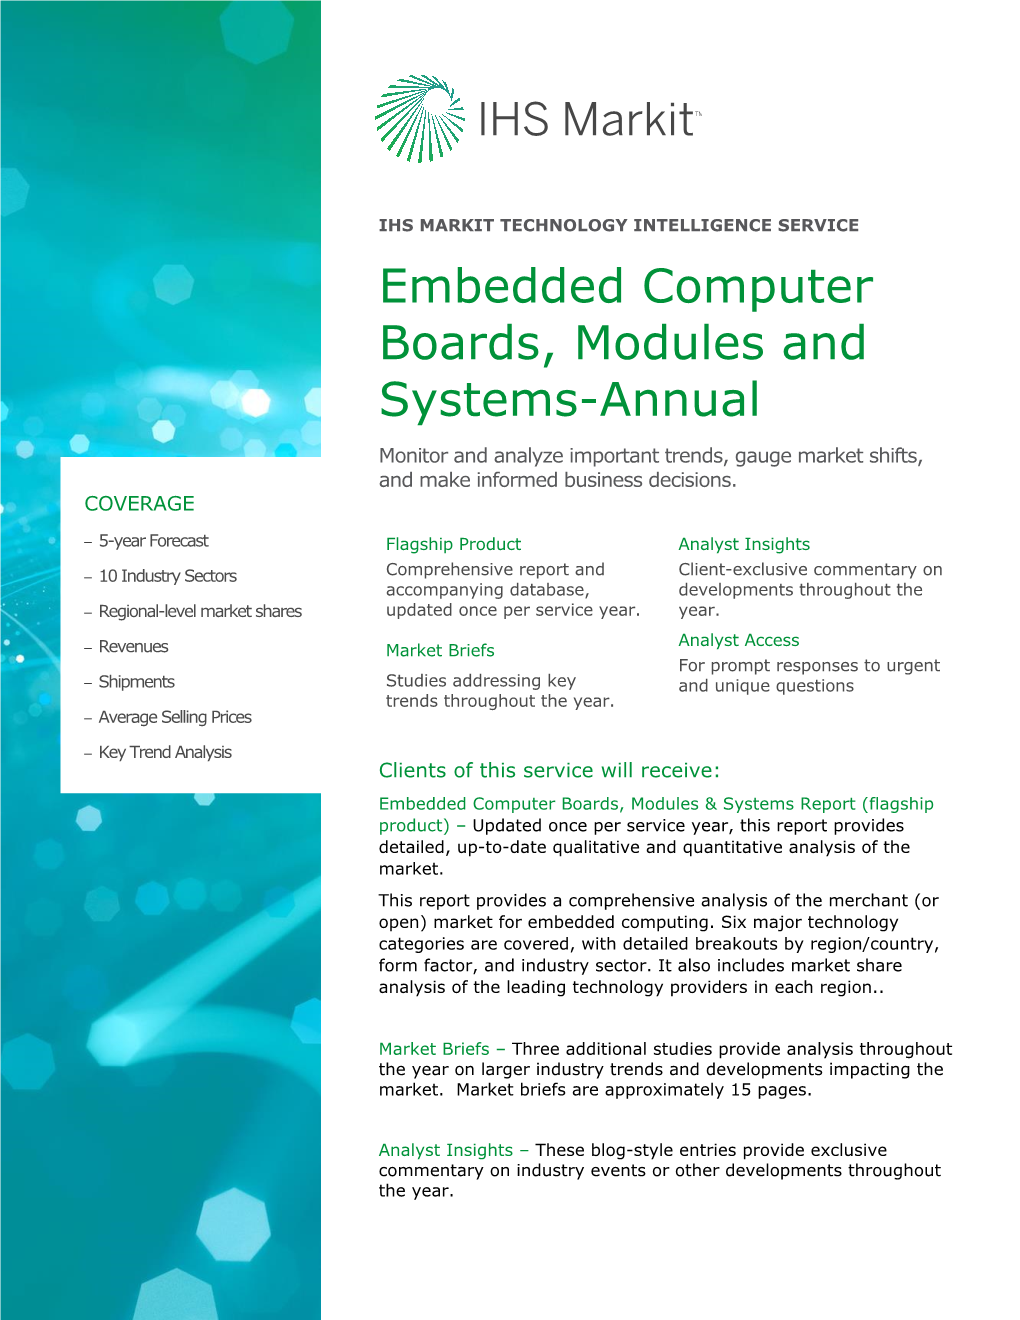 Embedded Computer Boards, Modules and Systems-Annual